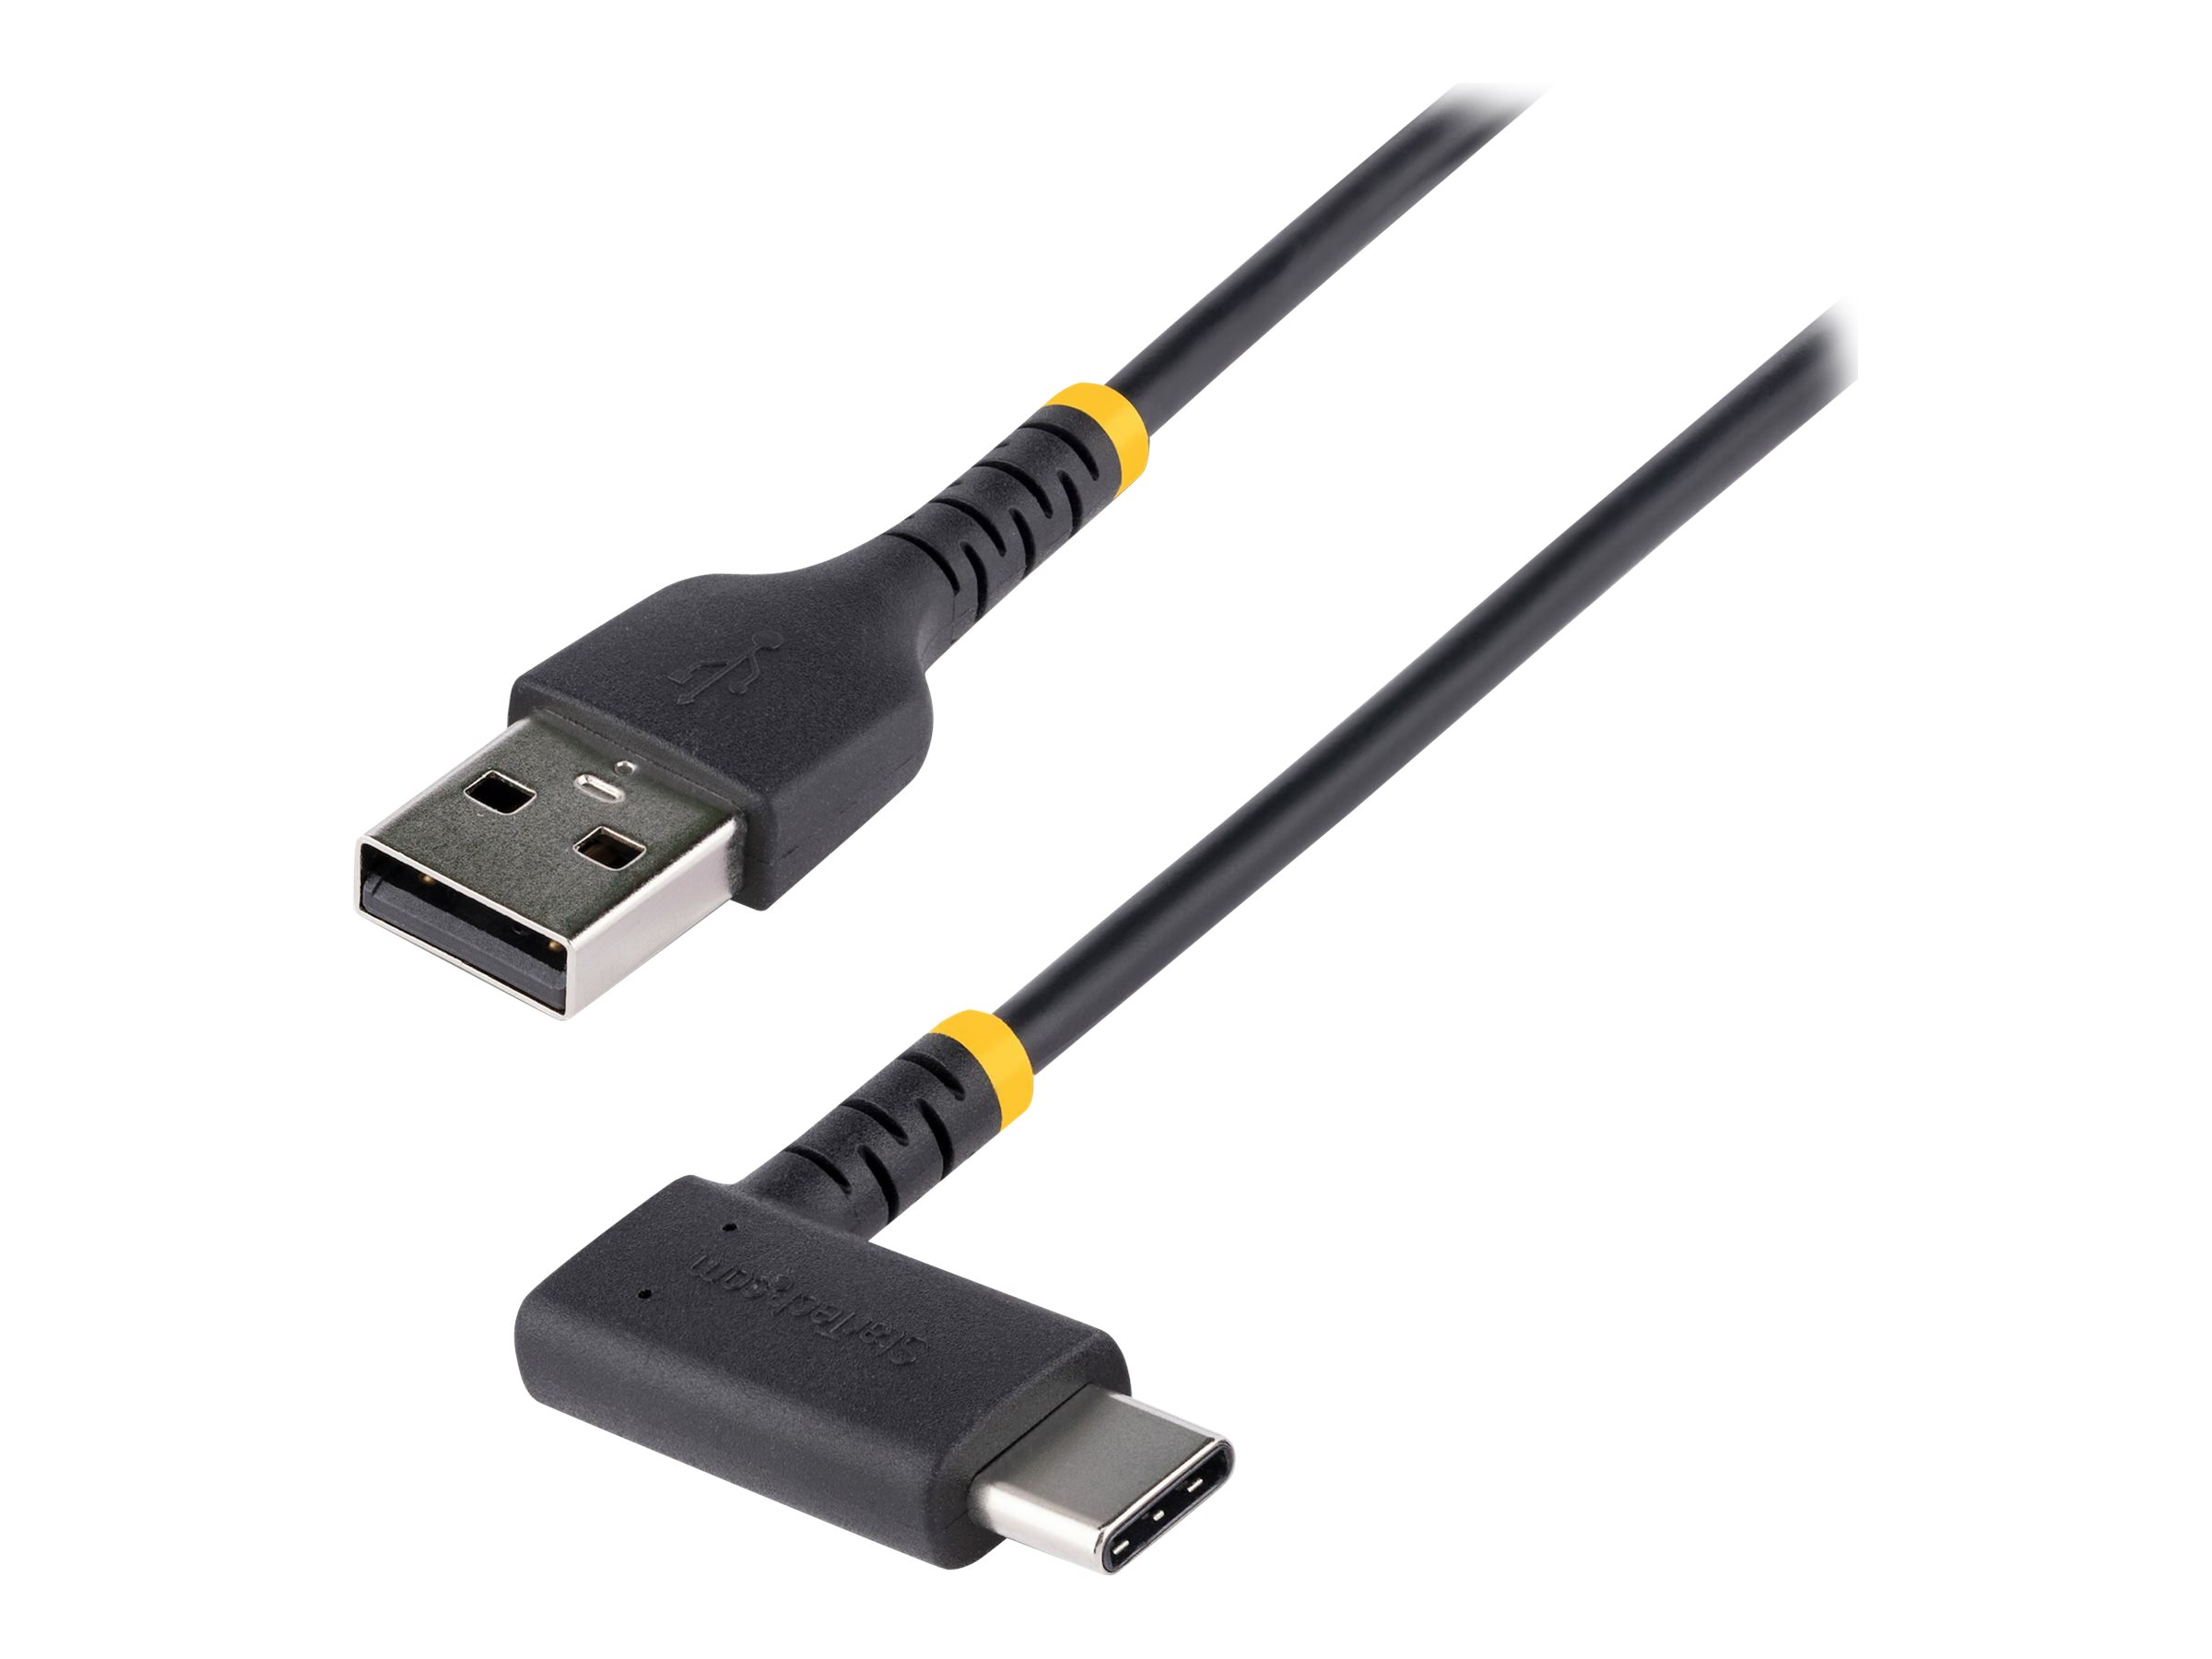 StarTech.com 6in (15cm) USB A to C Charging Cable Right Angle, Heavy Duty Fast Charge USB-C Cable, USB 2.0 A to Type-C, Durable and Rugged Aramid Fiber, 3A, S20/iPad/Pixel - High Quality Short USB Charging Cord (R2ACR-15C-USB-CABLE) - Câble USB - USB (M) droit pour 24 pin USB-C (M) angle droit - Thunderbolt 3 / USB 2.0 - 3 A - 15 cm - noir - R2ACR-15C-USB-CABLE - Câbles USB